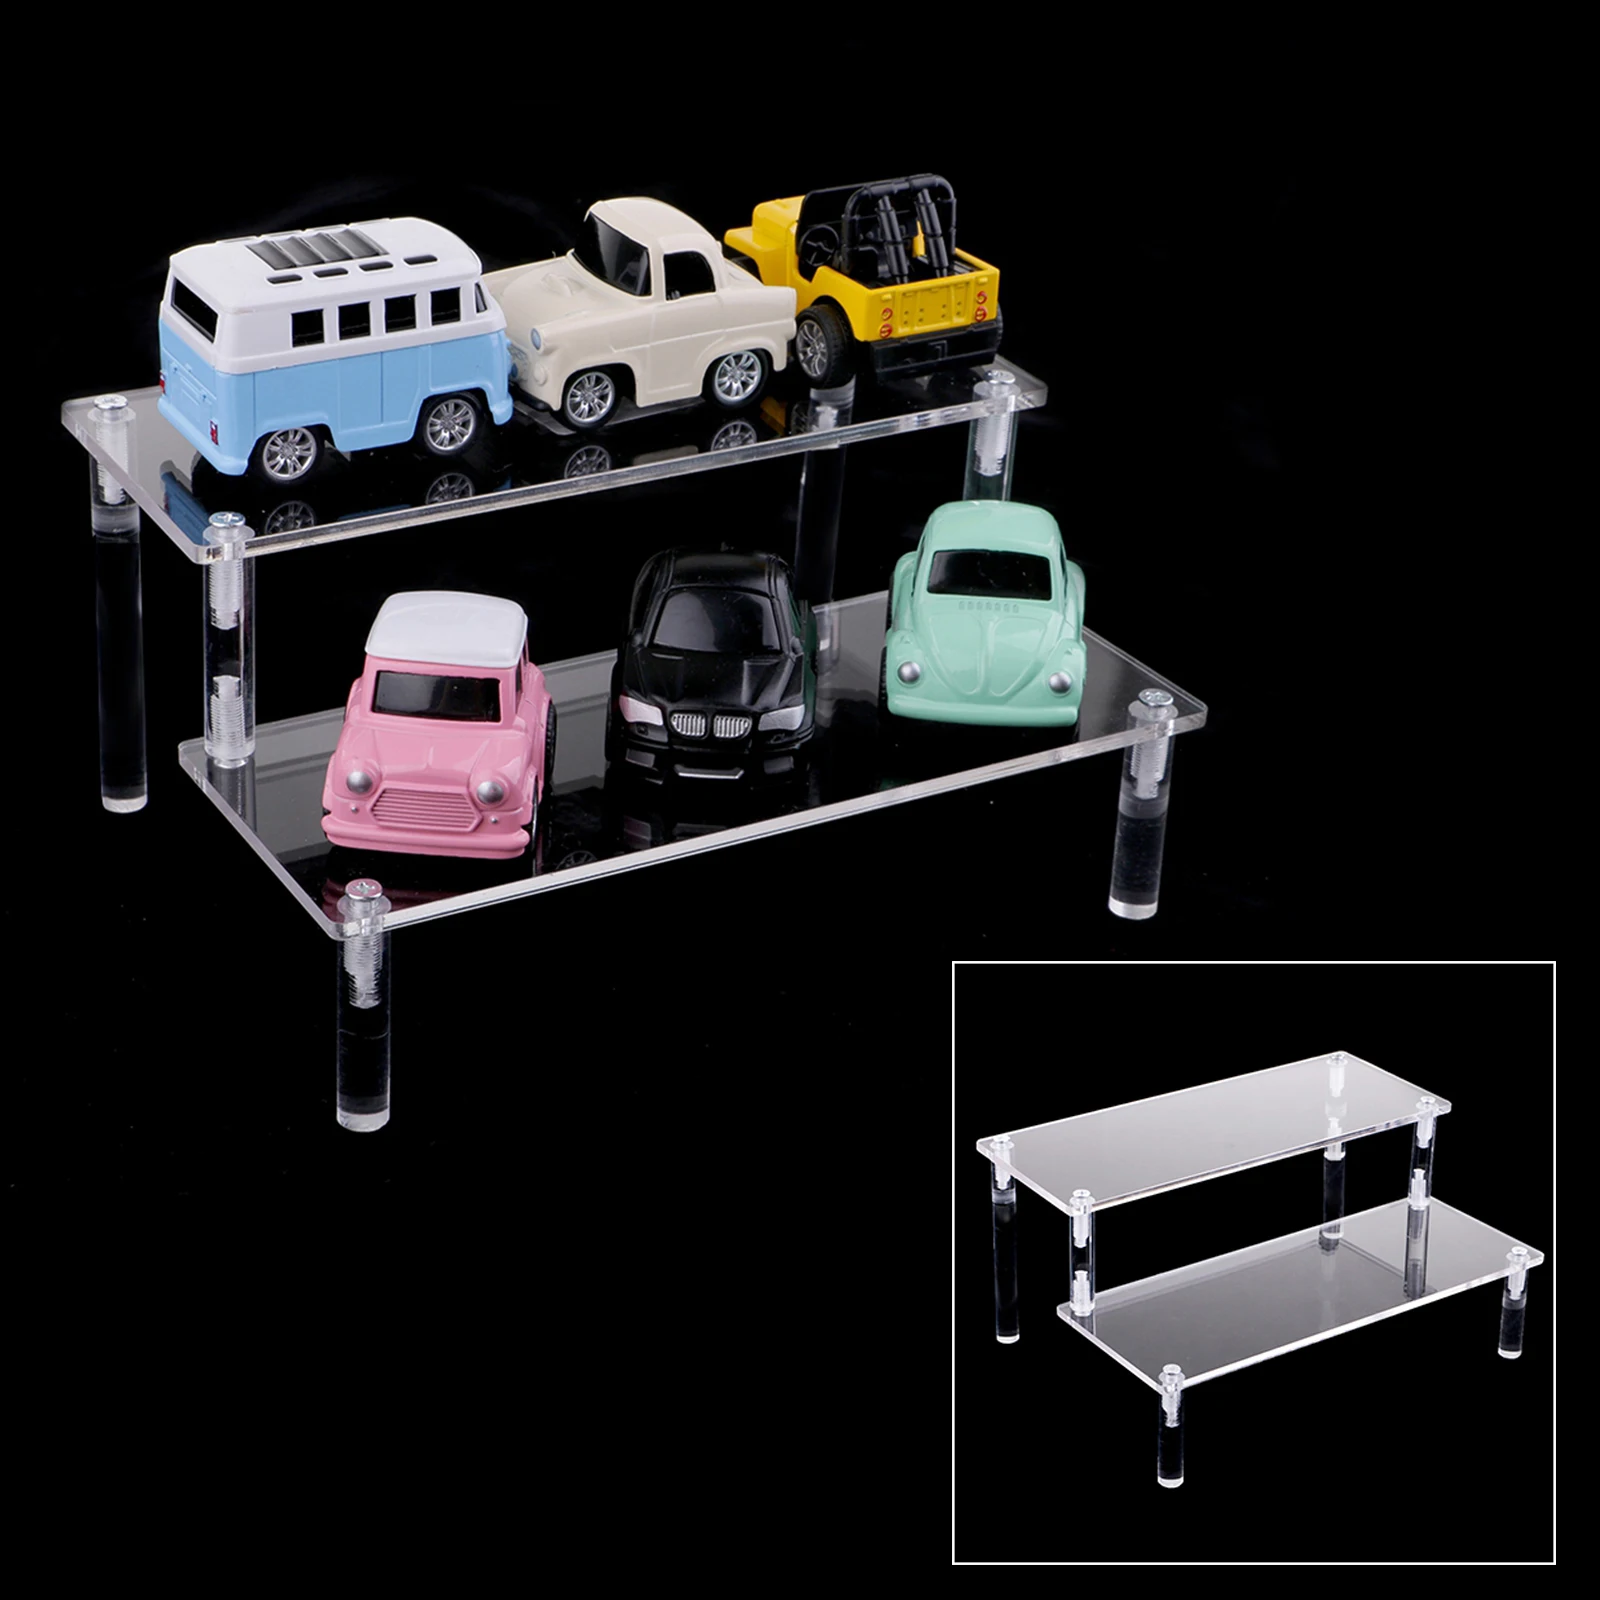 Clear Transparent Ladder Tire Acrylic Rack Cosmetics Organizer Cupcakes Toys Model Ladder Display Stand